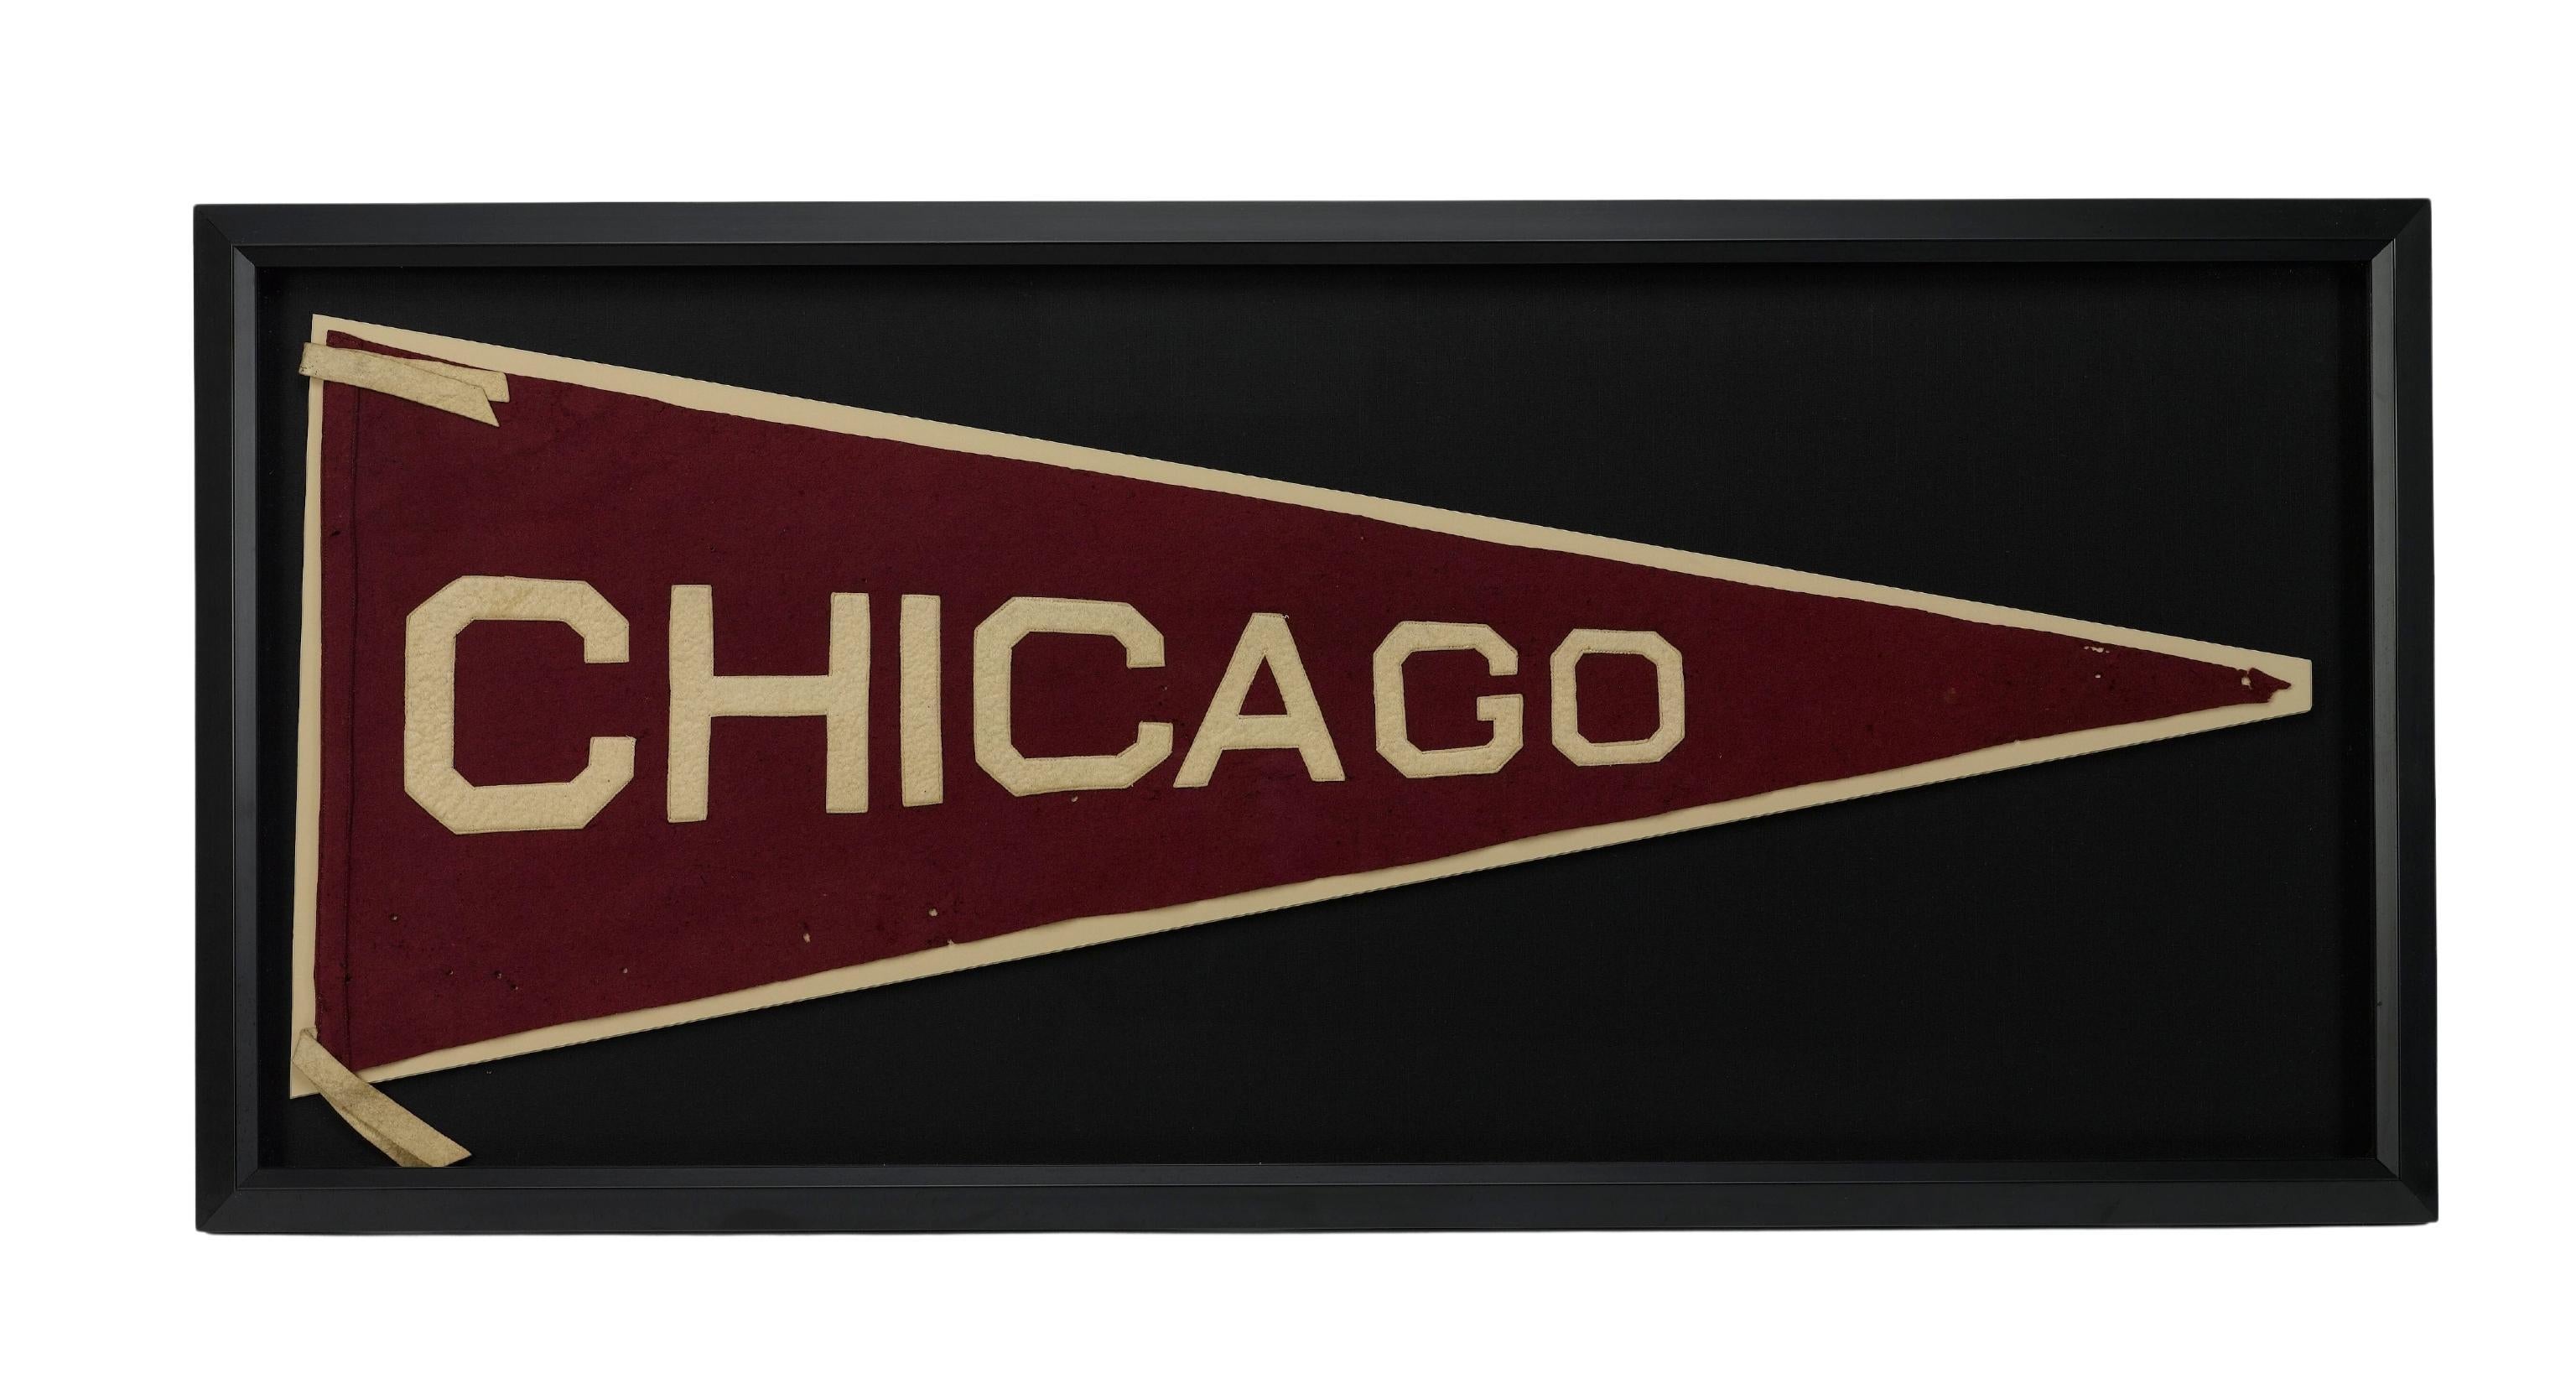 Presented is a vintage University of Chicago felt pennant, dating to 1920-1930. The pennant is burgundy felt, with yellow block letters that read 